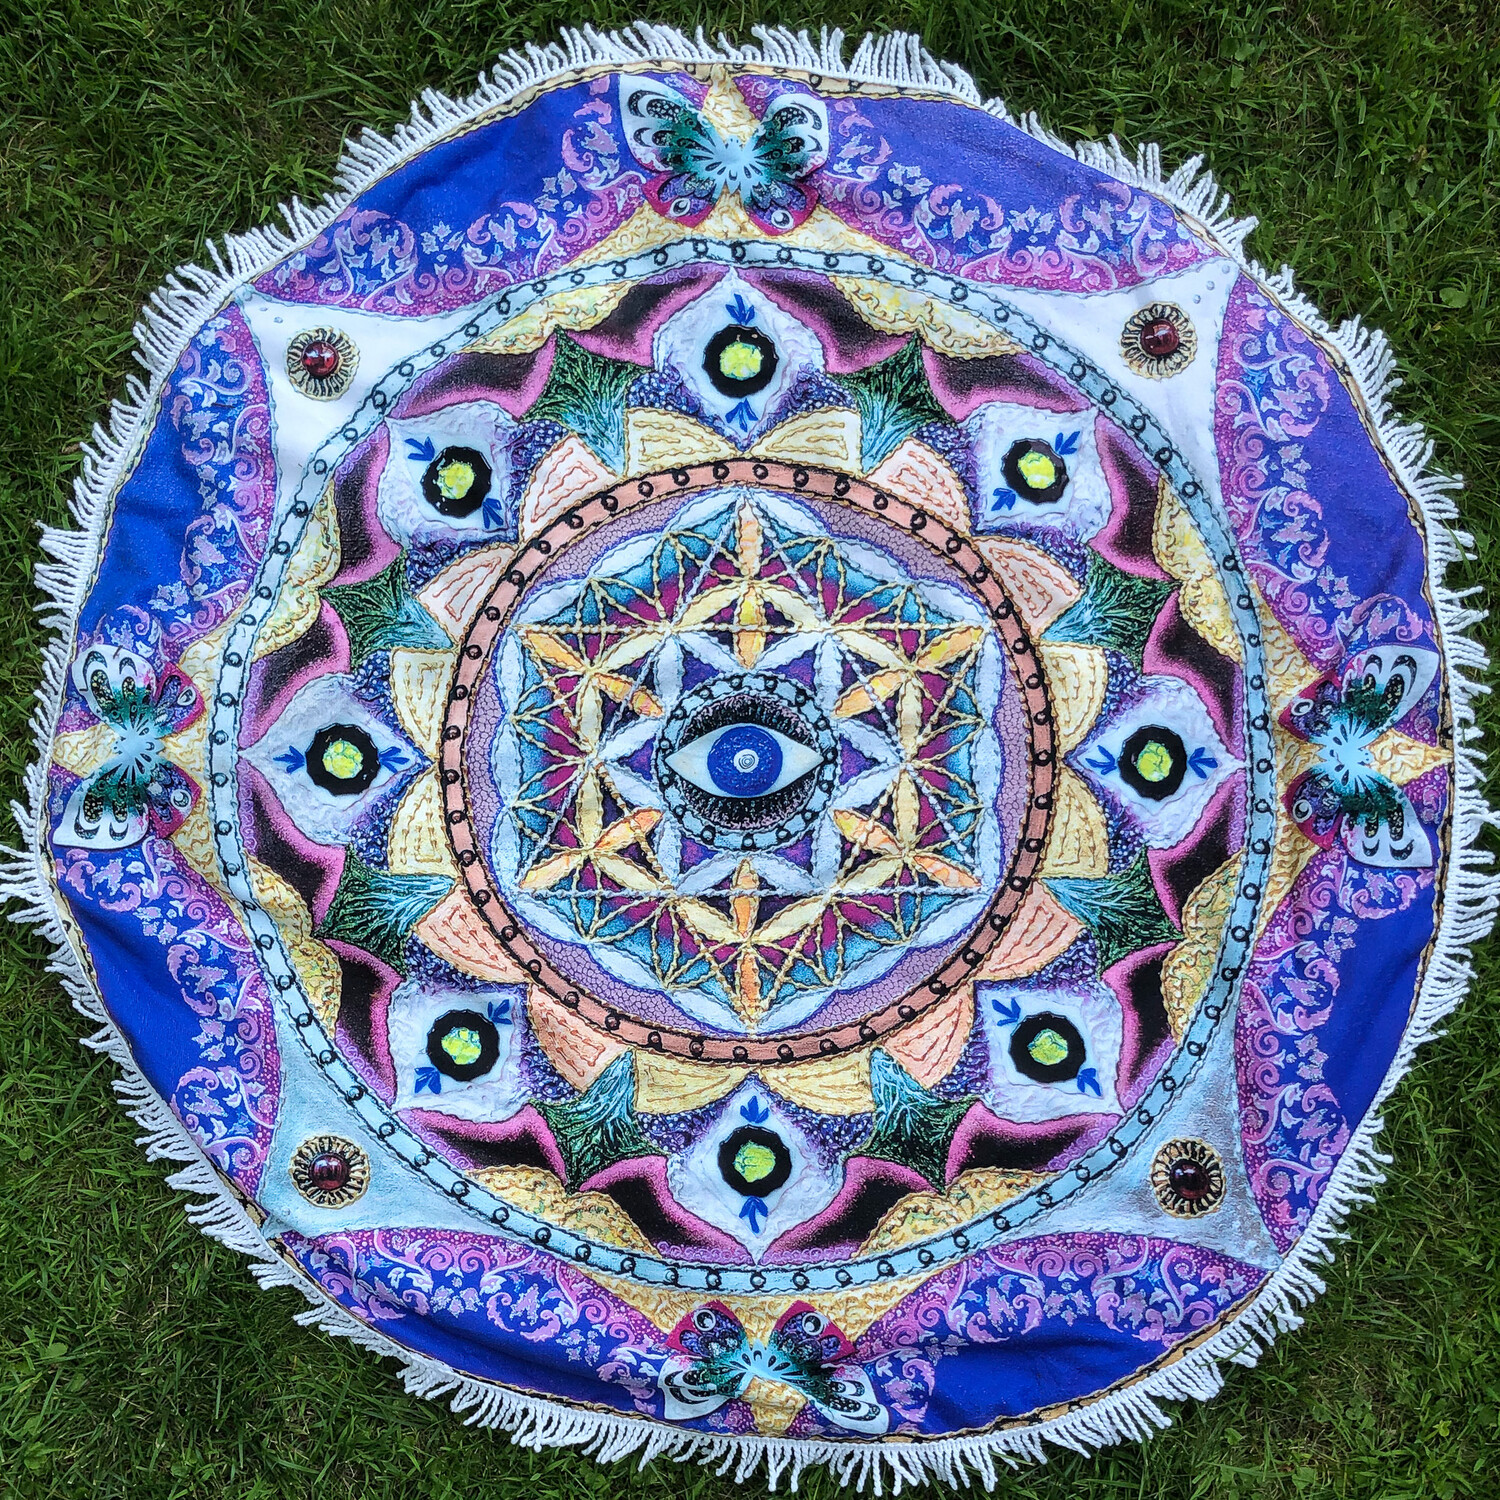  Large Round Psychedelic Beach Towel with Flower Of Life and Eye Design 